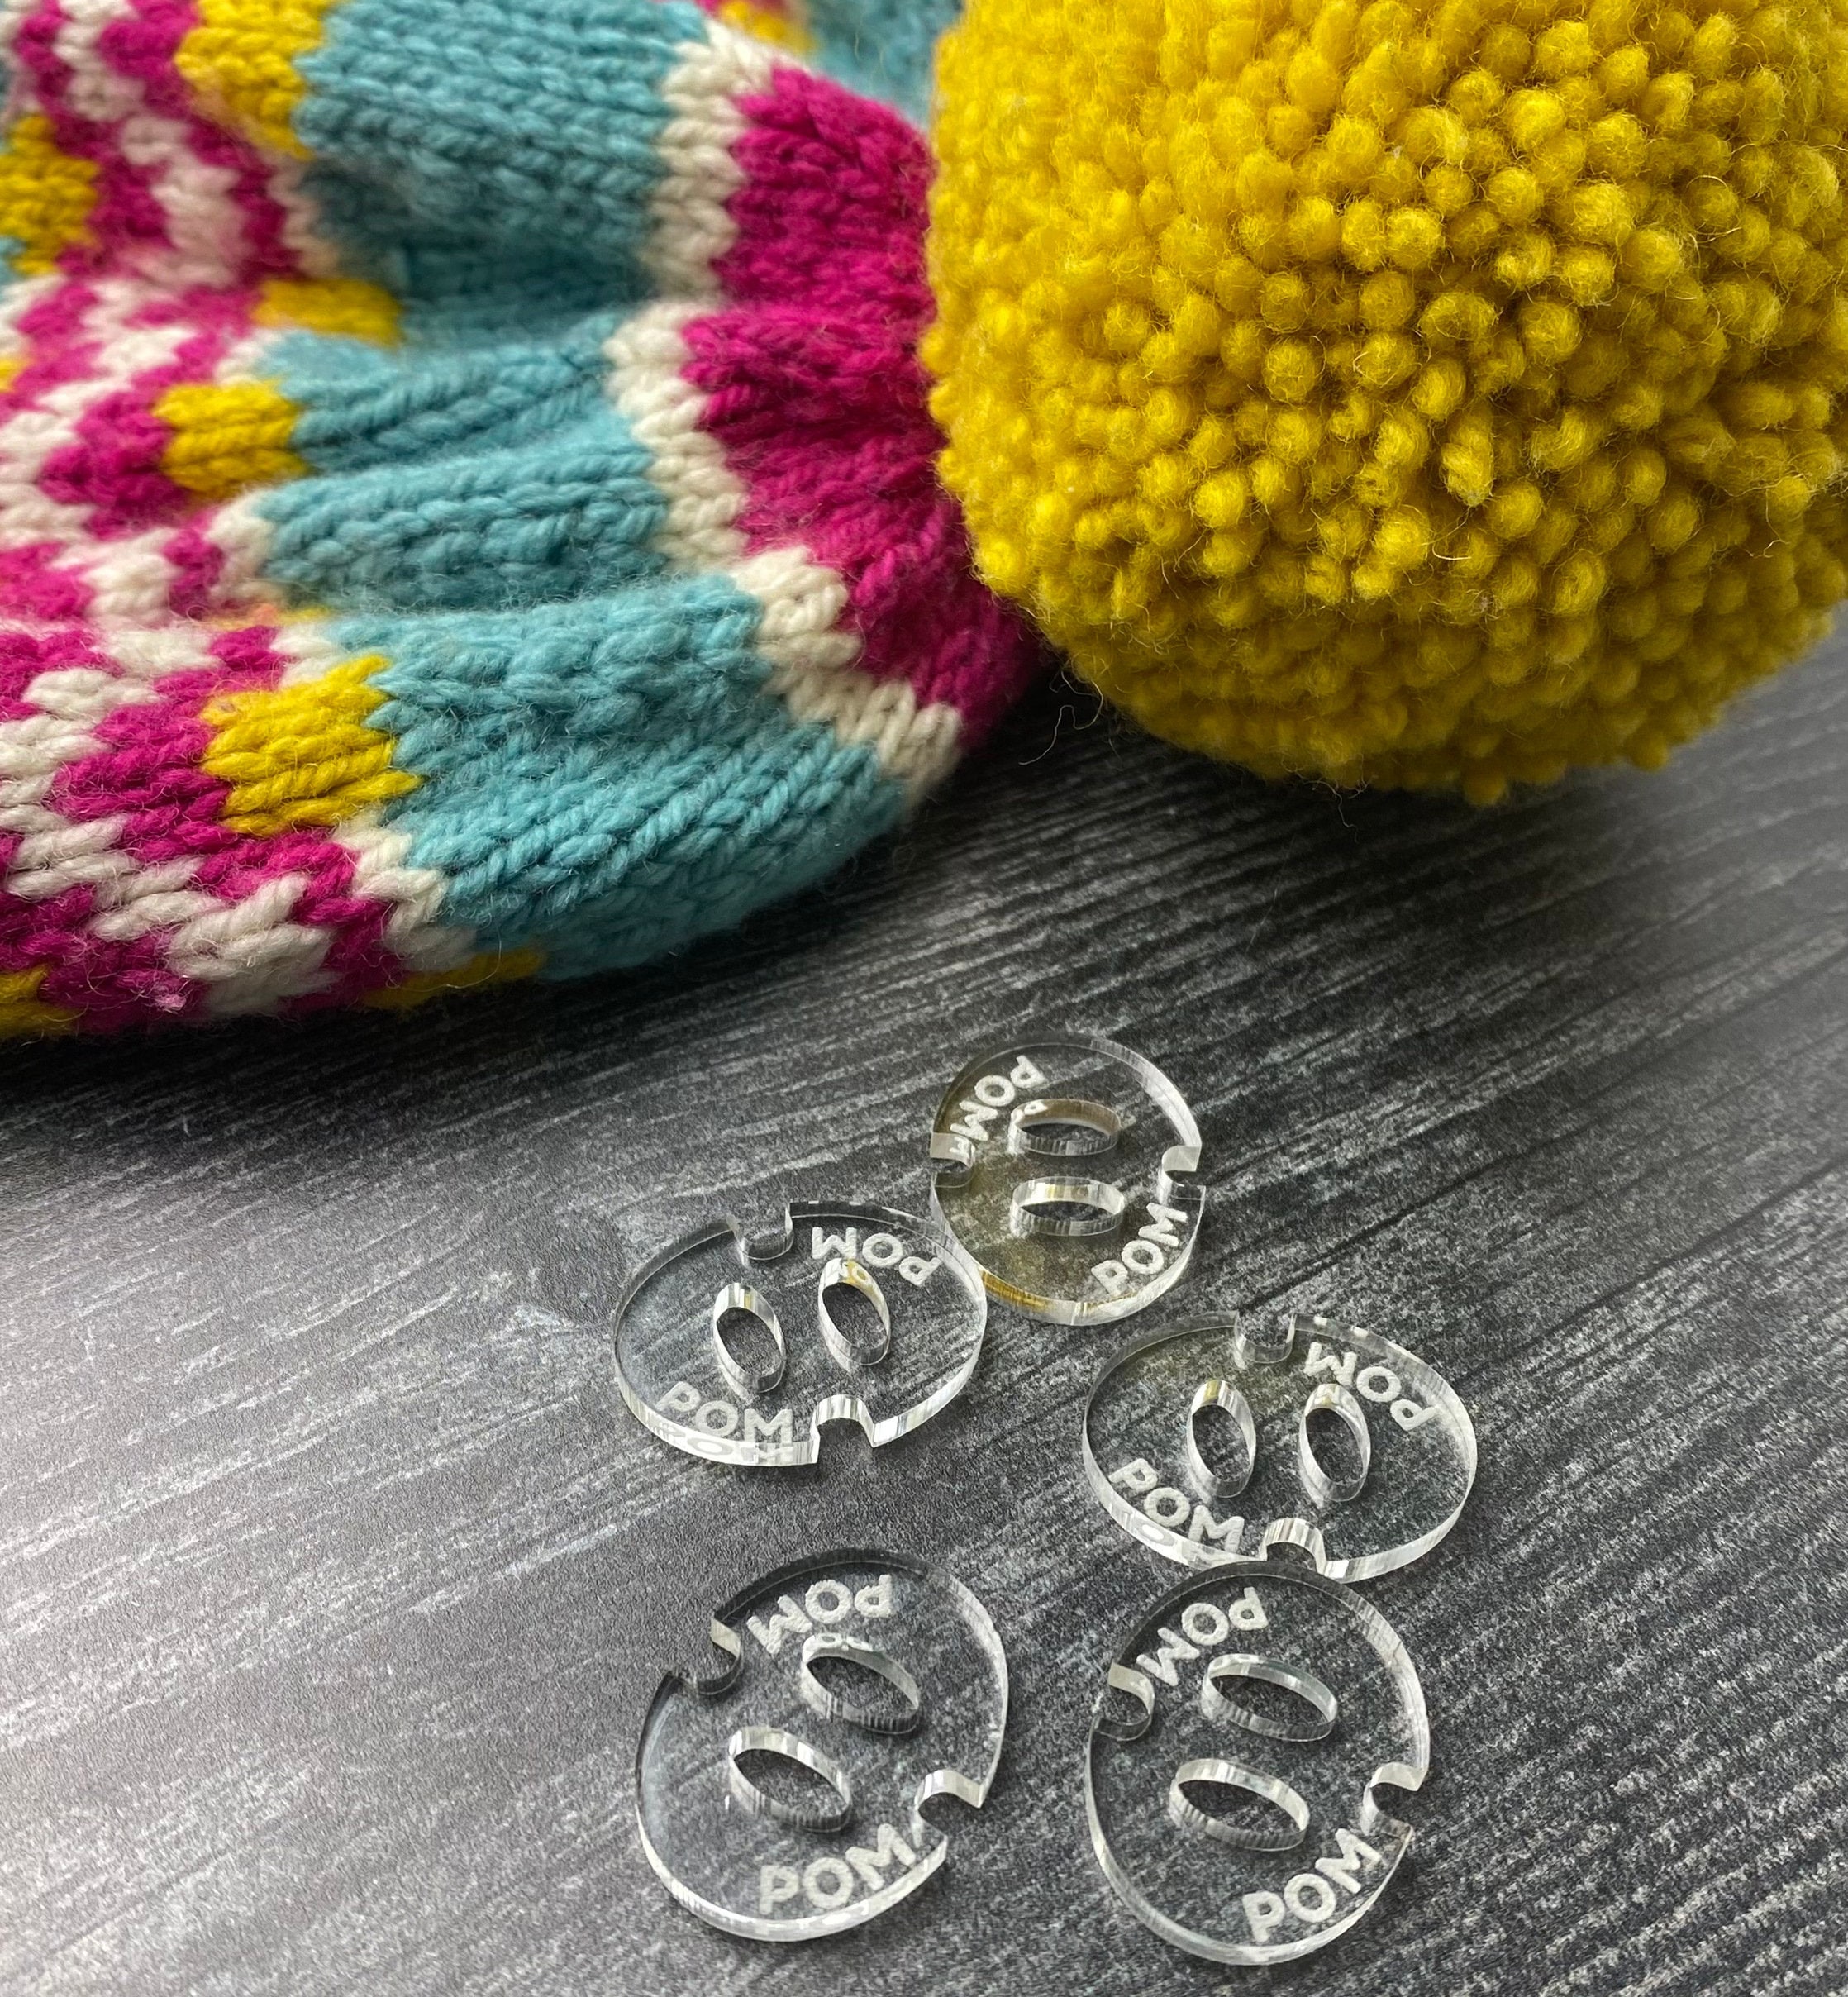 Removable Wooden Pom-pom Buttons for Faux Fur Pom-poms on Handmade Beanies,  Remove Before Washing Pom-pom Warning Tag, Faux Fur Pom Button 